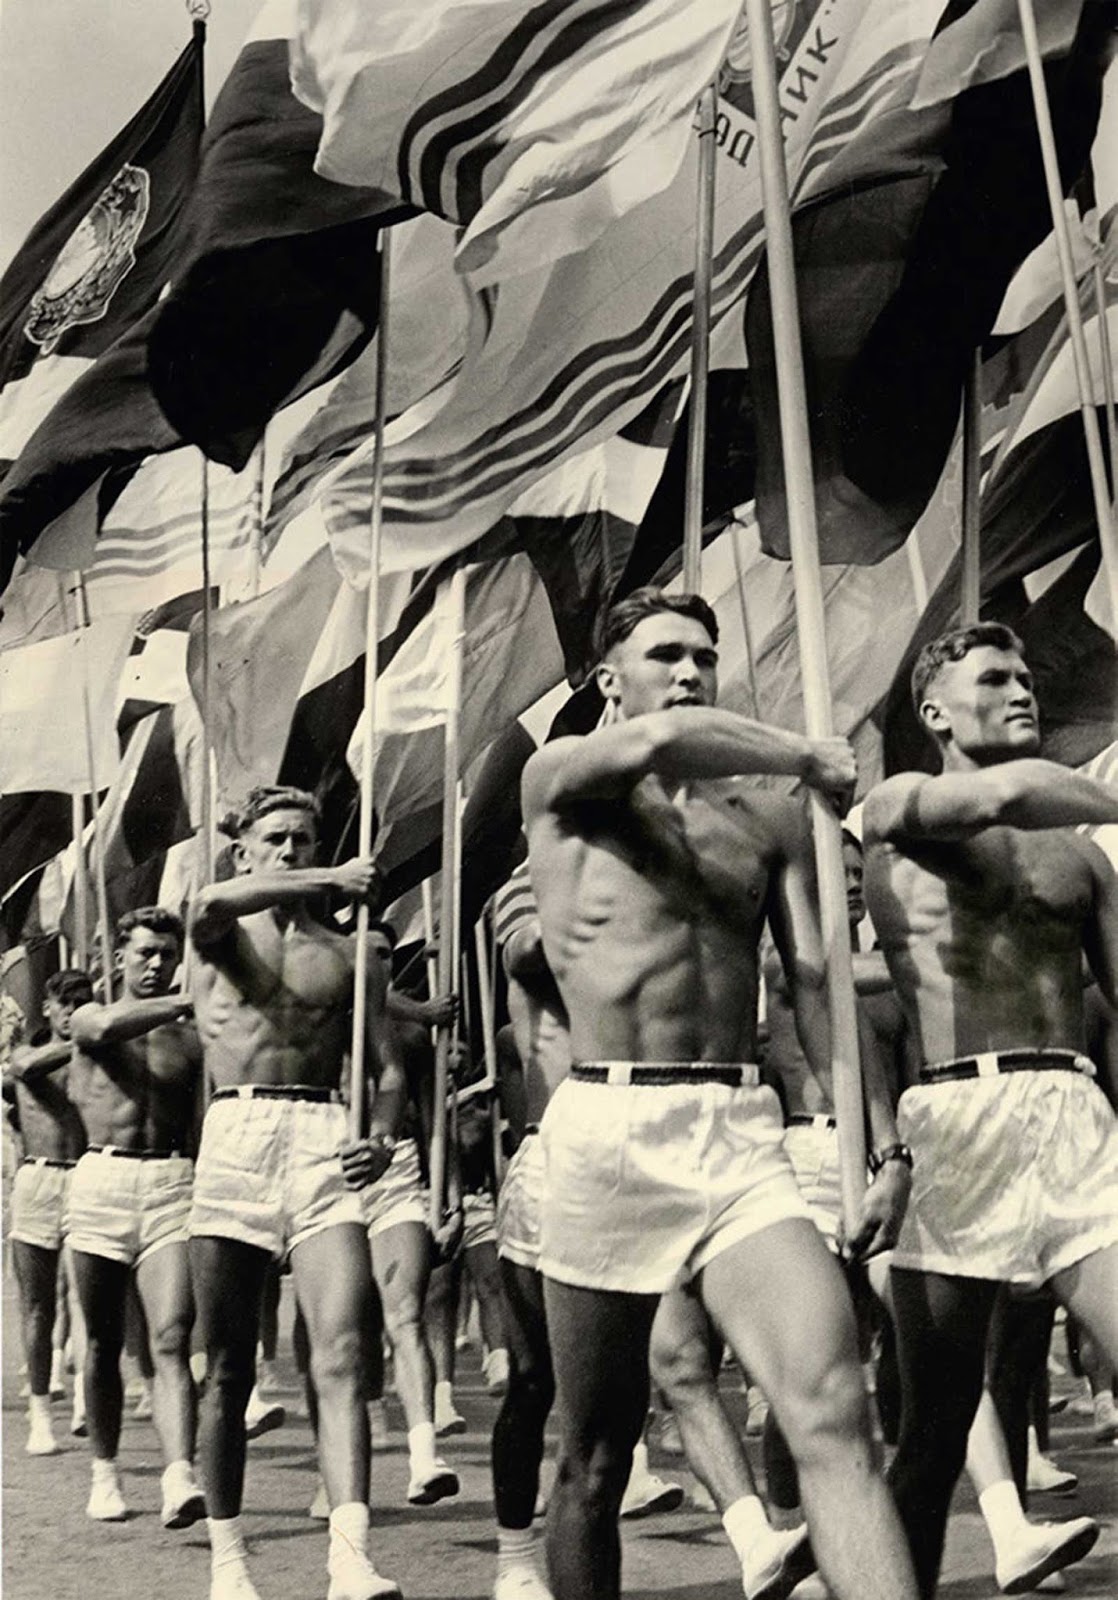 Soviet gym teachers parade in Moscow, 1956.

The Russian word used in the original title, “физкультурники“, is now usually translated as “gym teachers”, but at the moment of the parades meant “sportsmen/bodybuilders or athletes”. This is a legacy of Stalin era propaganda parades to promote physical fitness, mainly to make the people ready for heavy labor, possible wars and improve health of the nation.